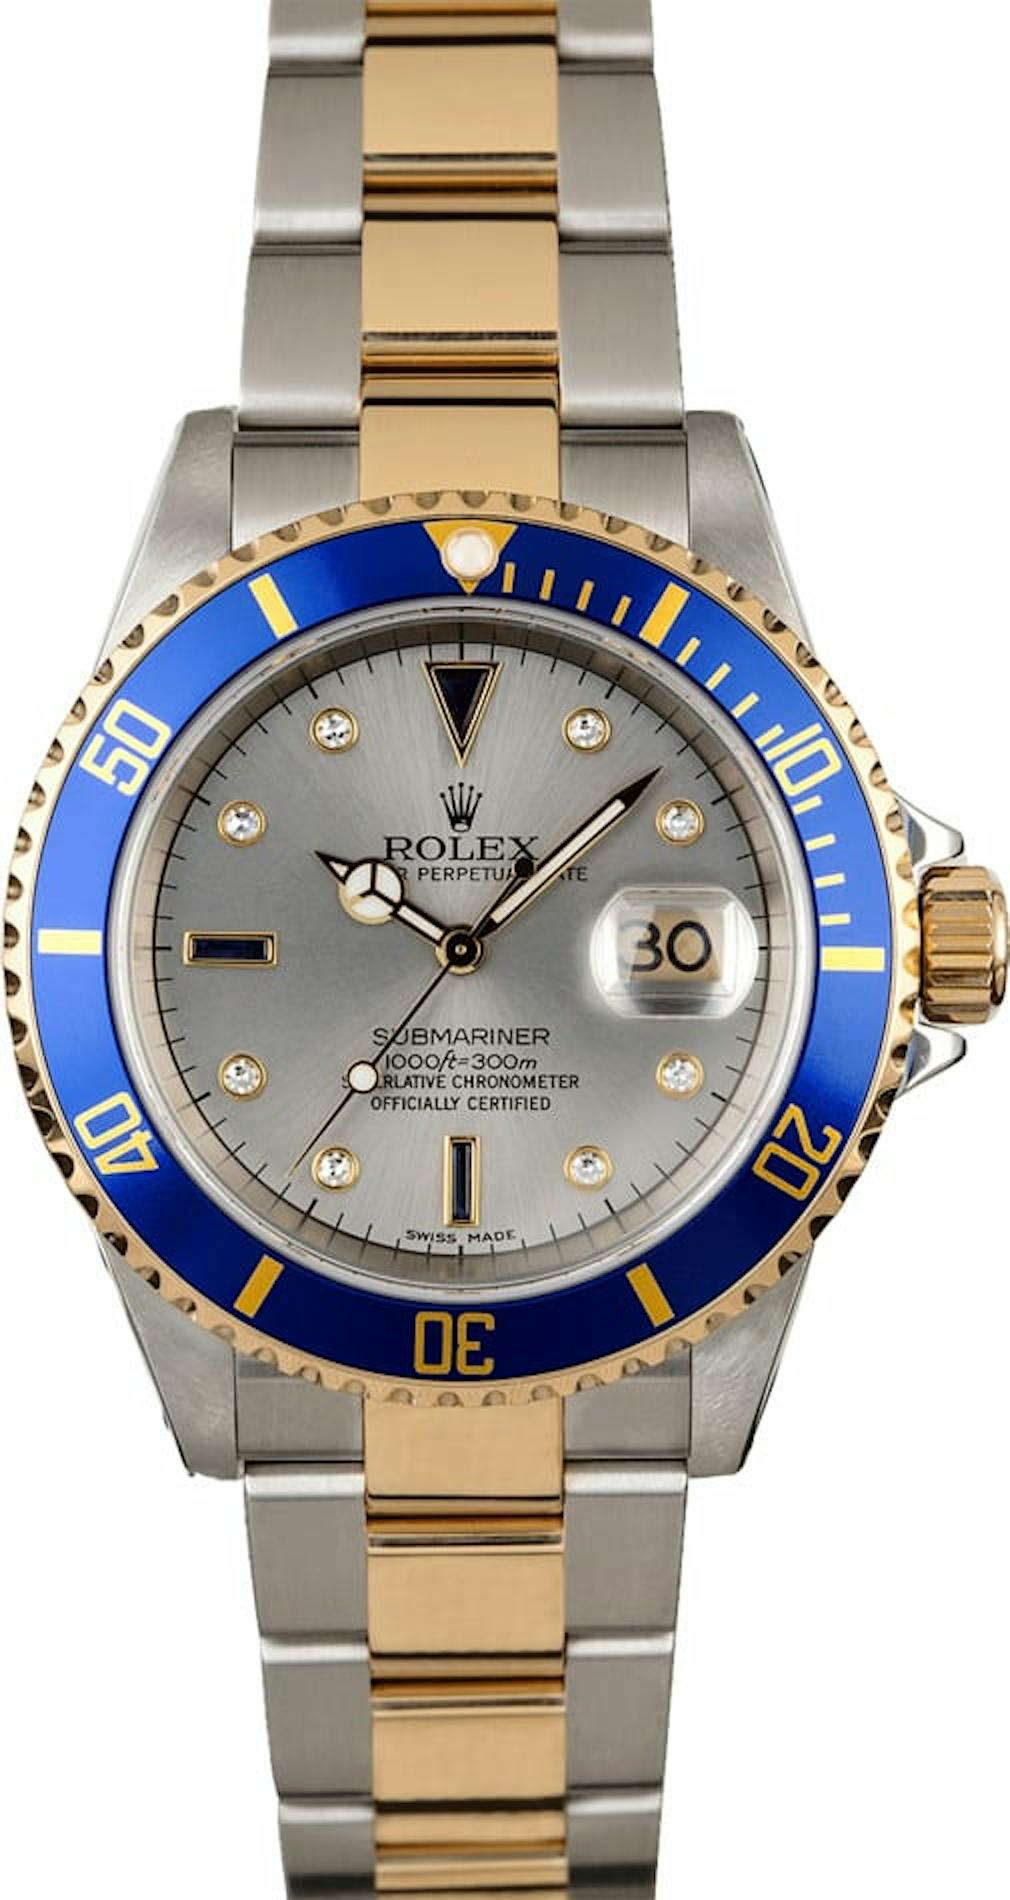 Rolex Submariner 16613 Slate Dial with Diamonds and Sapphires